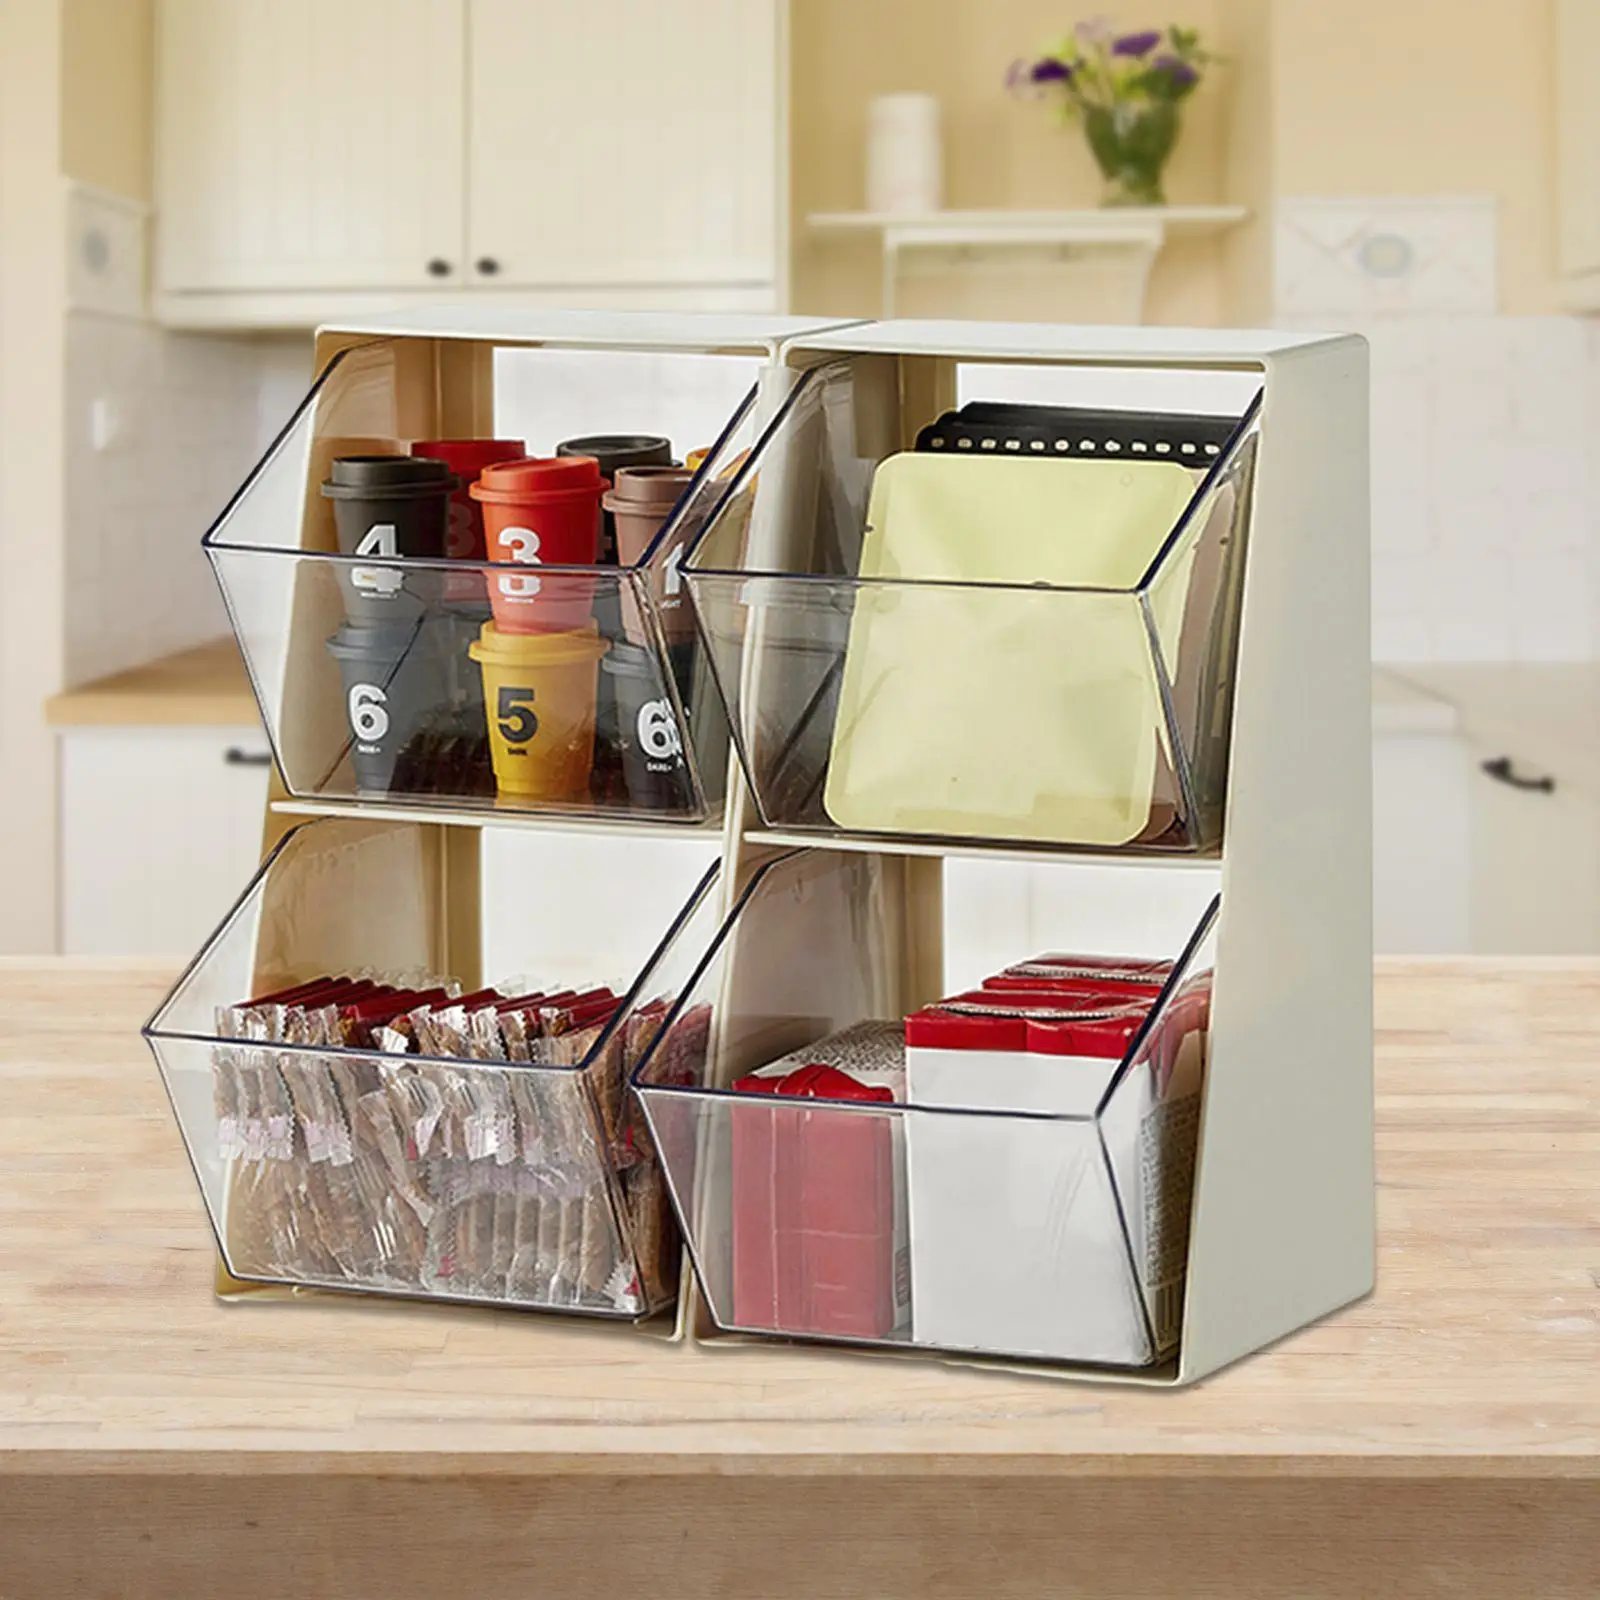 Clear Tea Box Storage Divided Container Portable Tea Holder Rack Large Capacity for Condiments Coffee Creamers Closets Bathroom